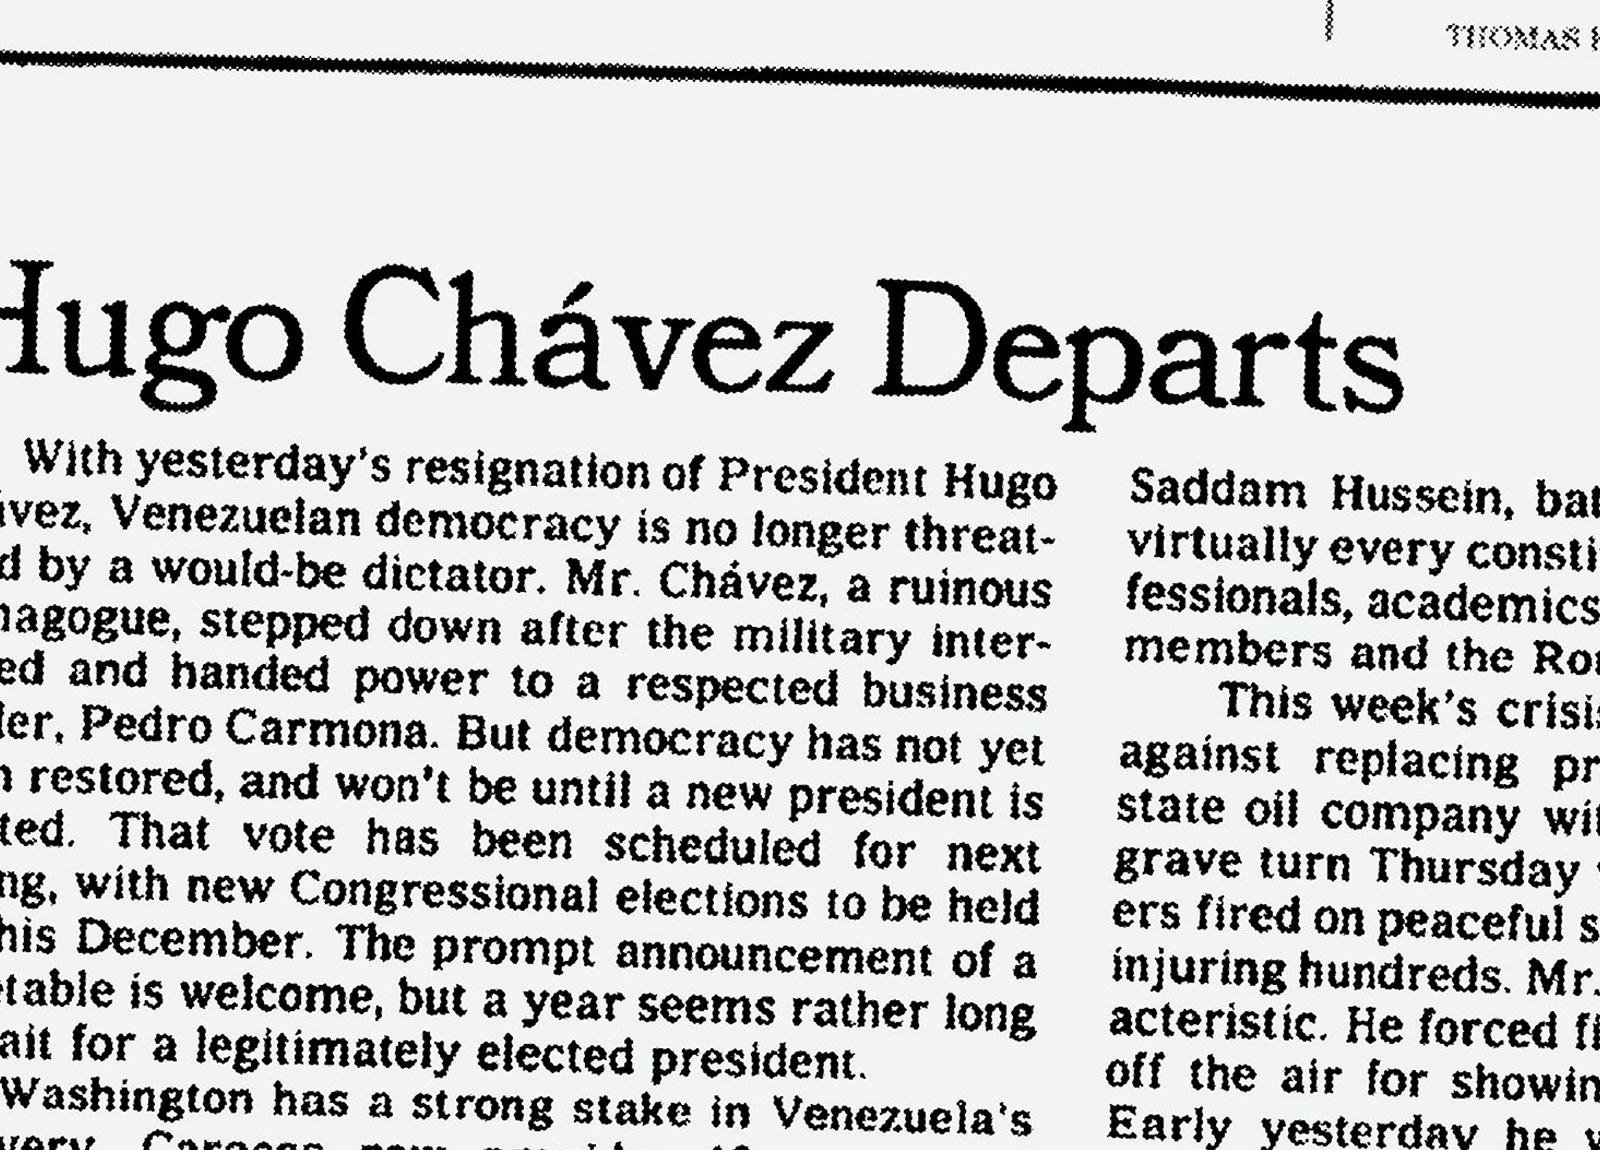 Illustration:
A New York Times article, from a 2019 paper, is blown up so that it extends beyond the edges of the frame. The headline reads: “Hugo Chávez Departs.”